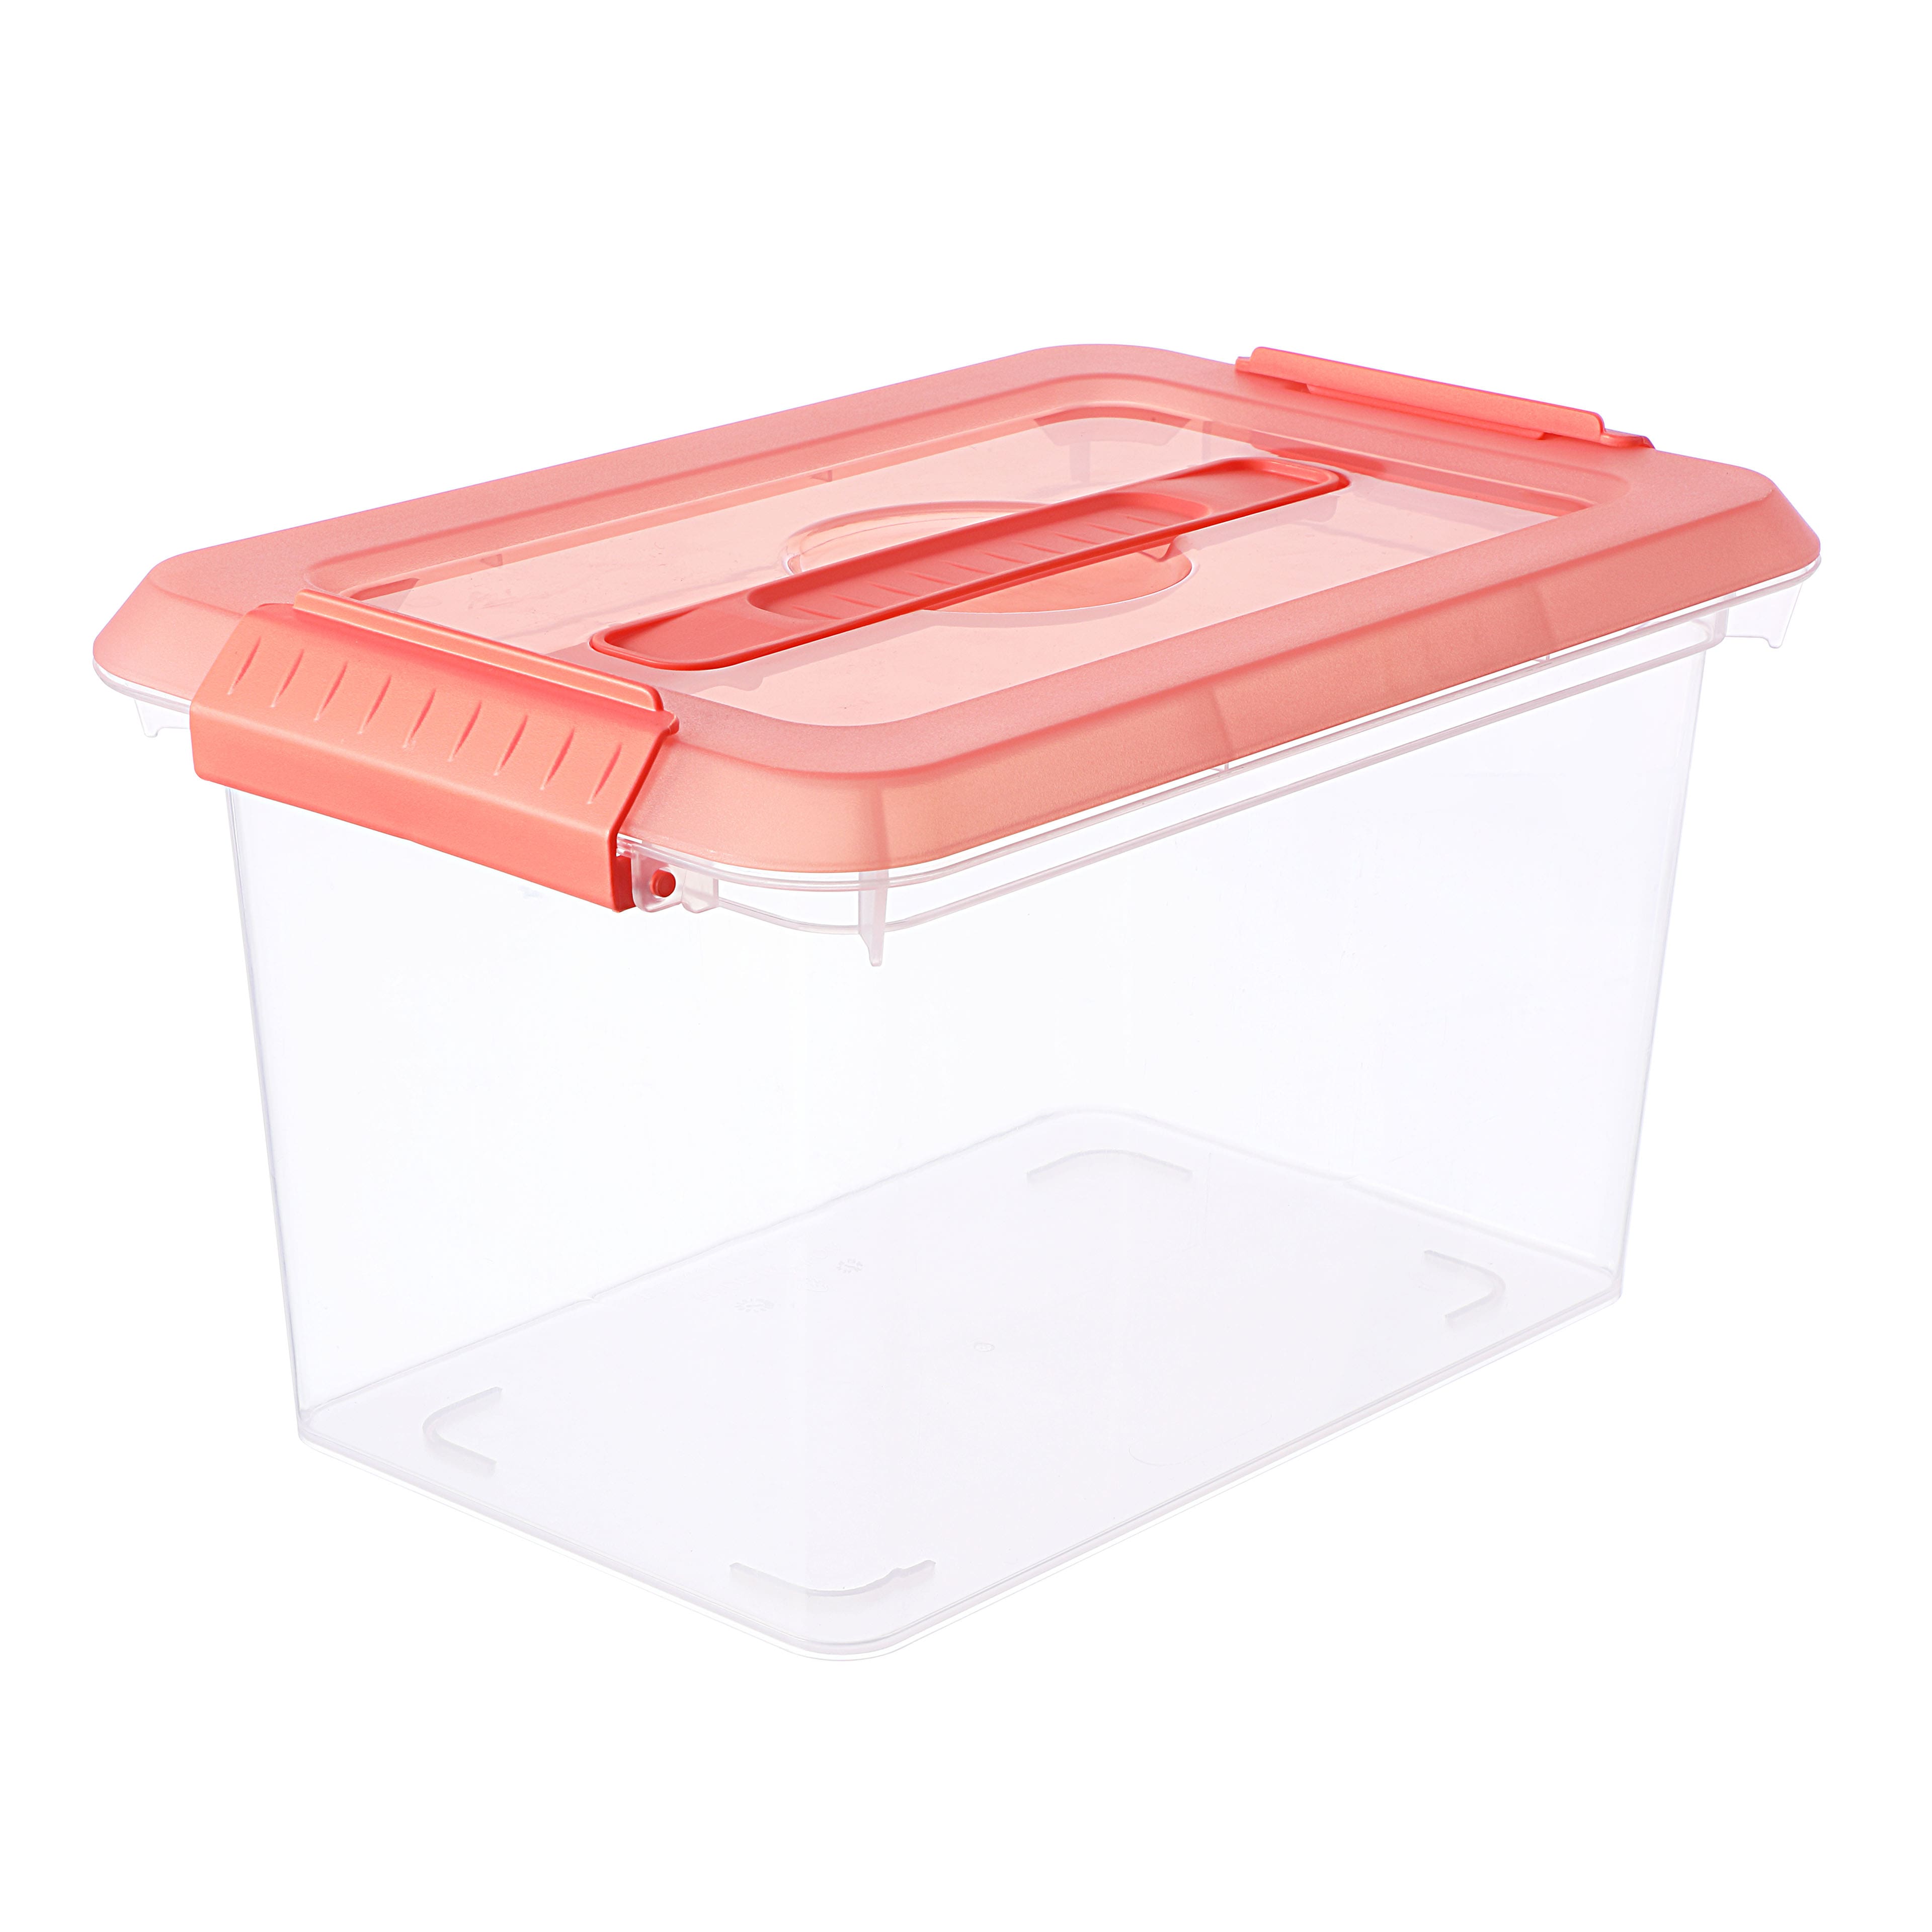 Plastic Storage Boxes for Creatives, Artists & Crafters — WestonBoxes